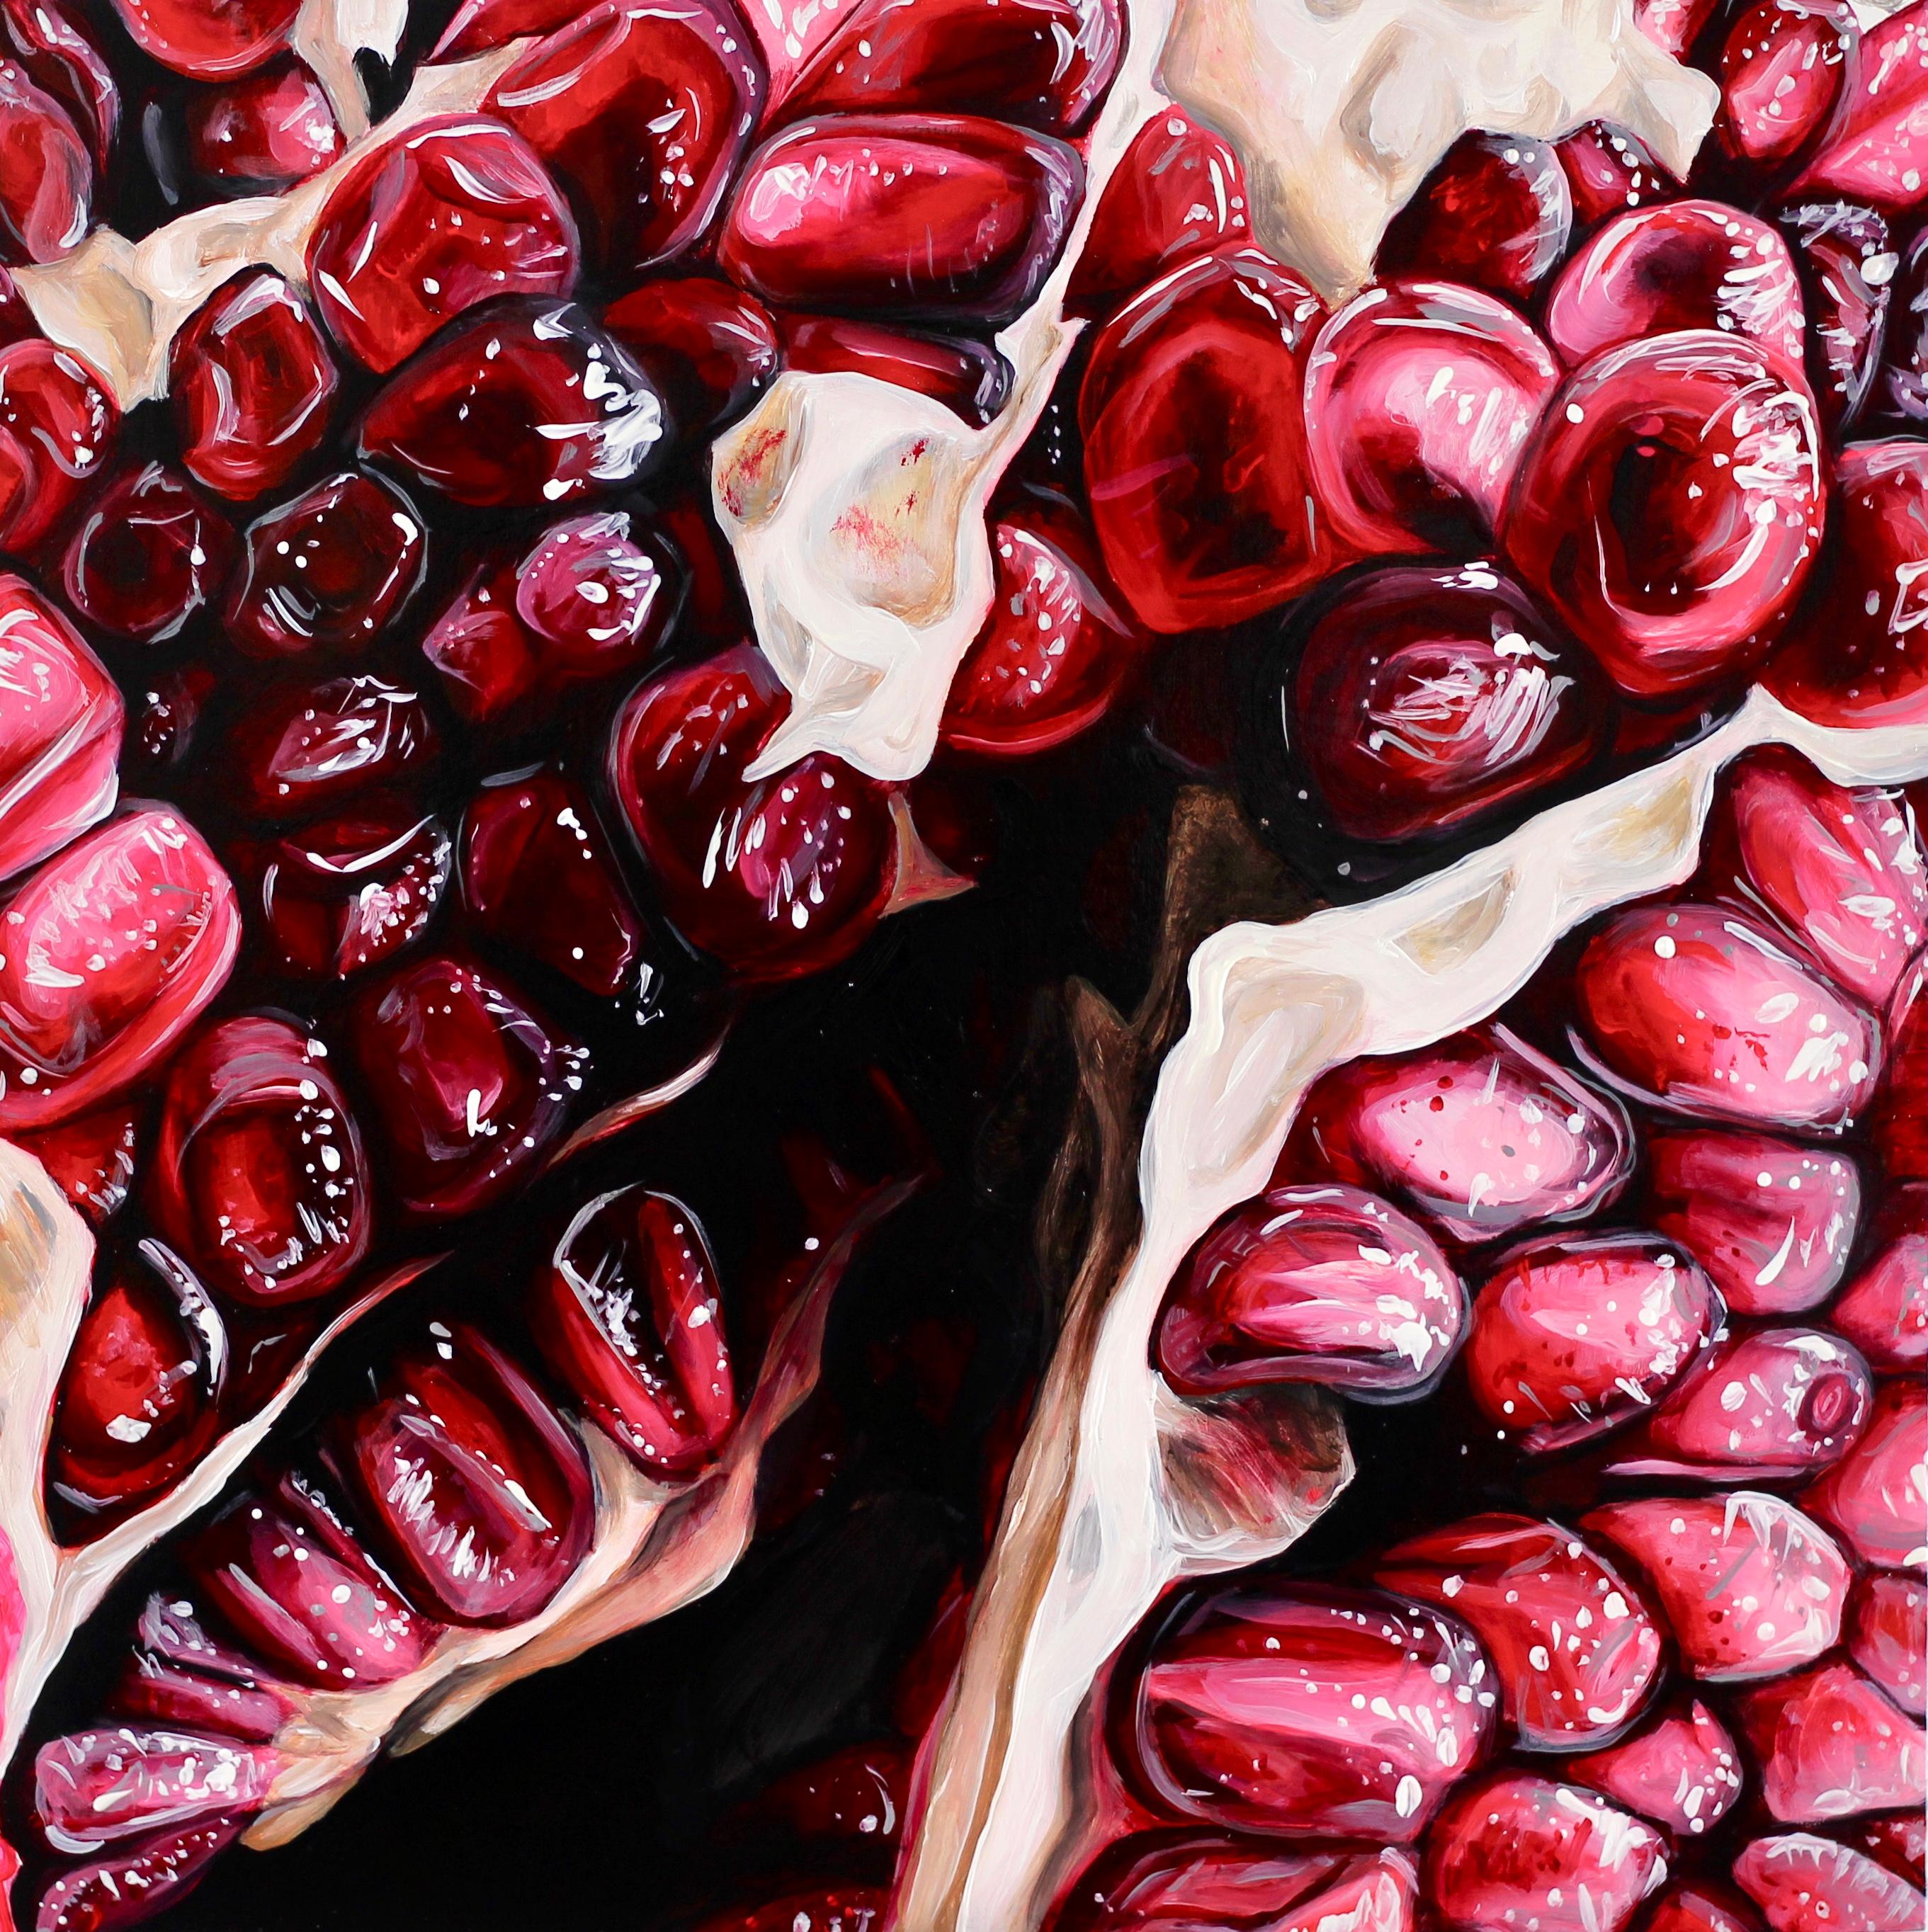 Pomegranate-original modern hyper realism still life painting-contemporary Art - Painting by Angela Faustina